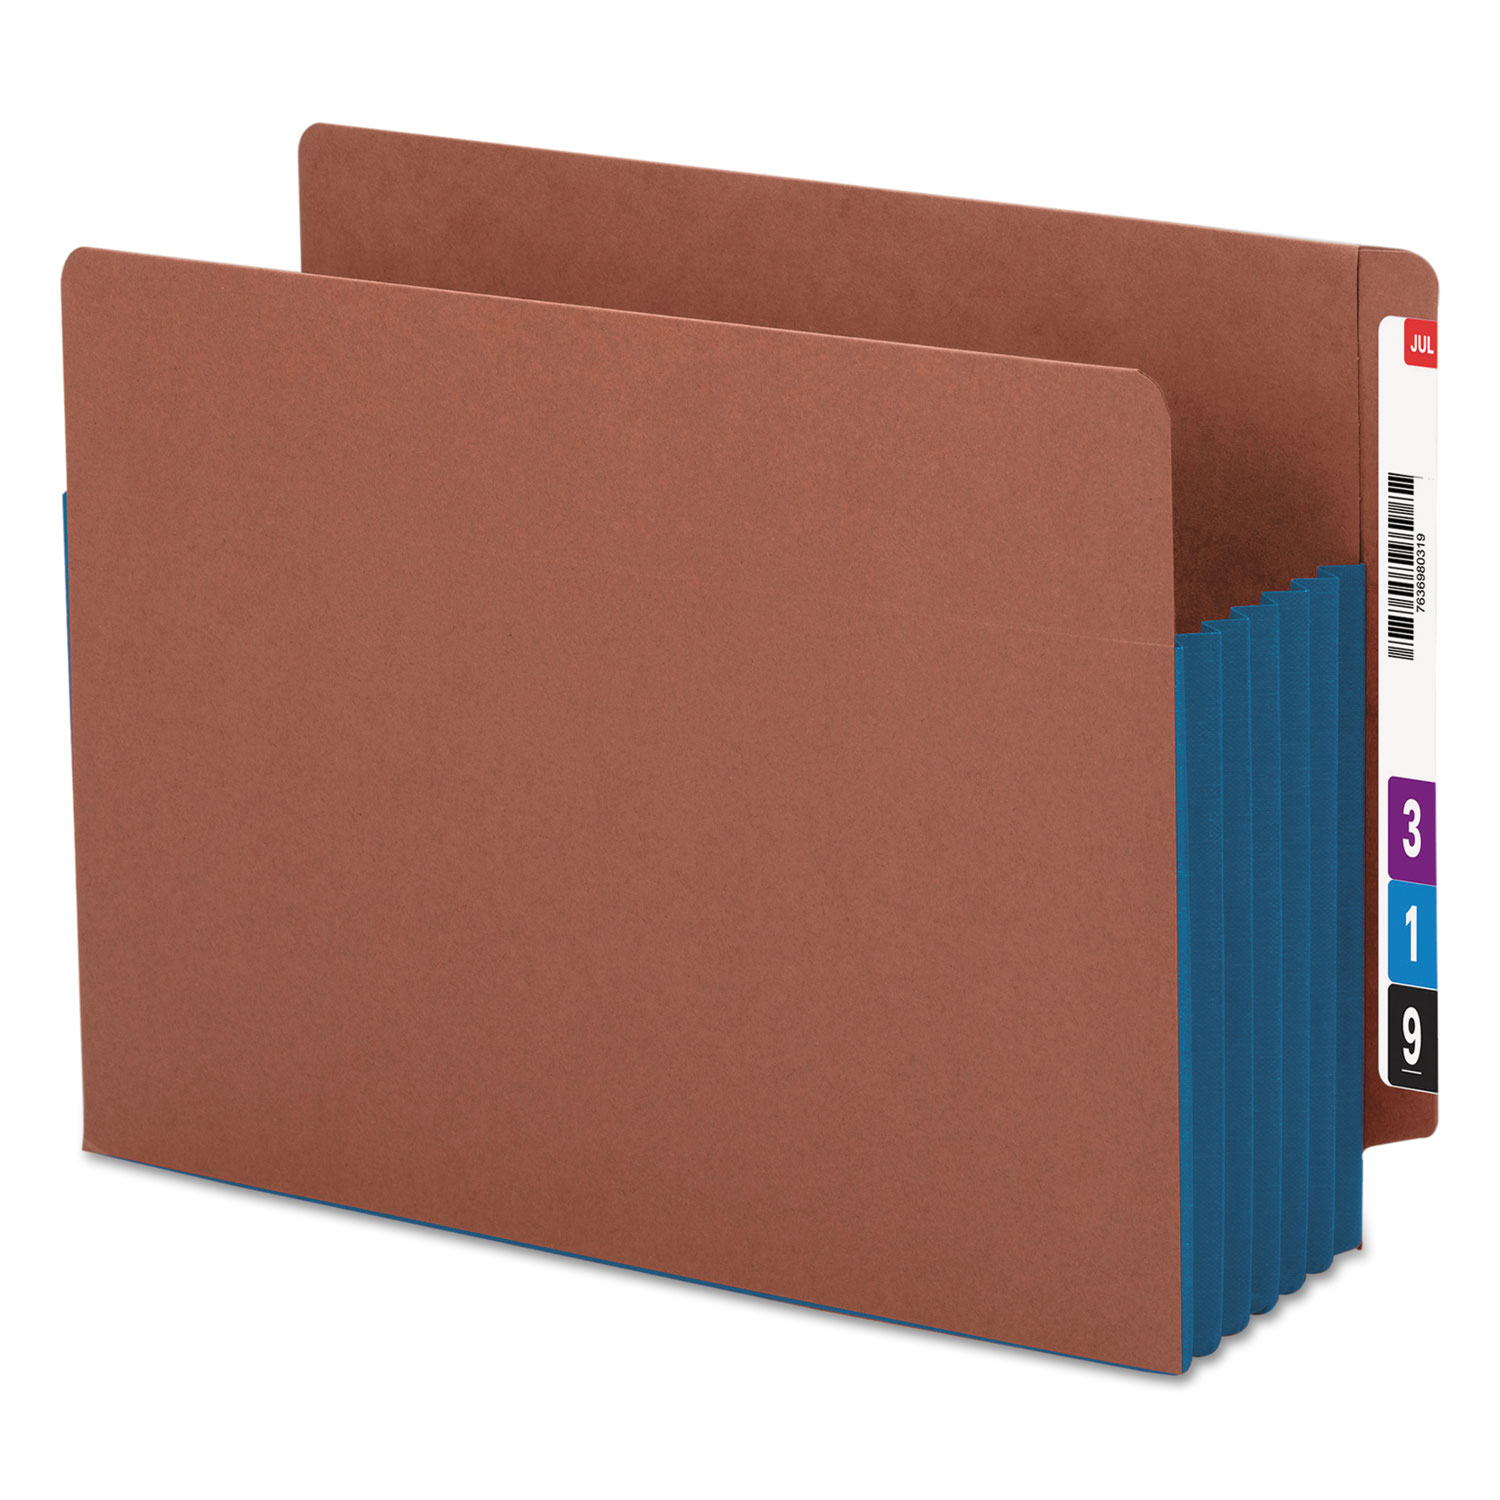  Smead 73689 Redrope Drop-Front End Tab File Pockets w/ Fully Lined Colored Gussets, 5.25 Expansion, Letter Size, Redrope/Blue, 10/Box (SMD73689) 